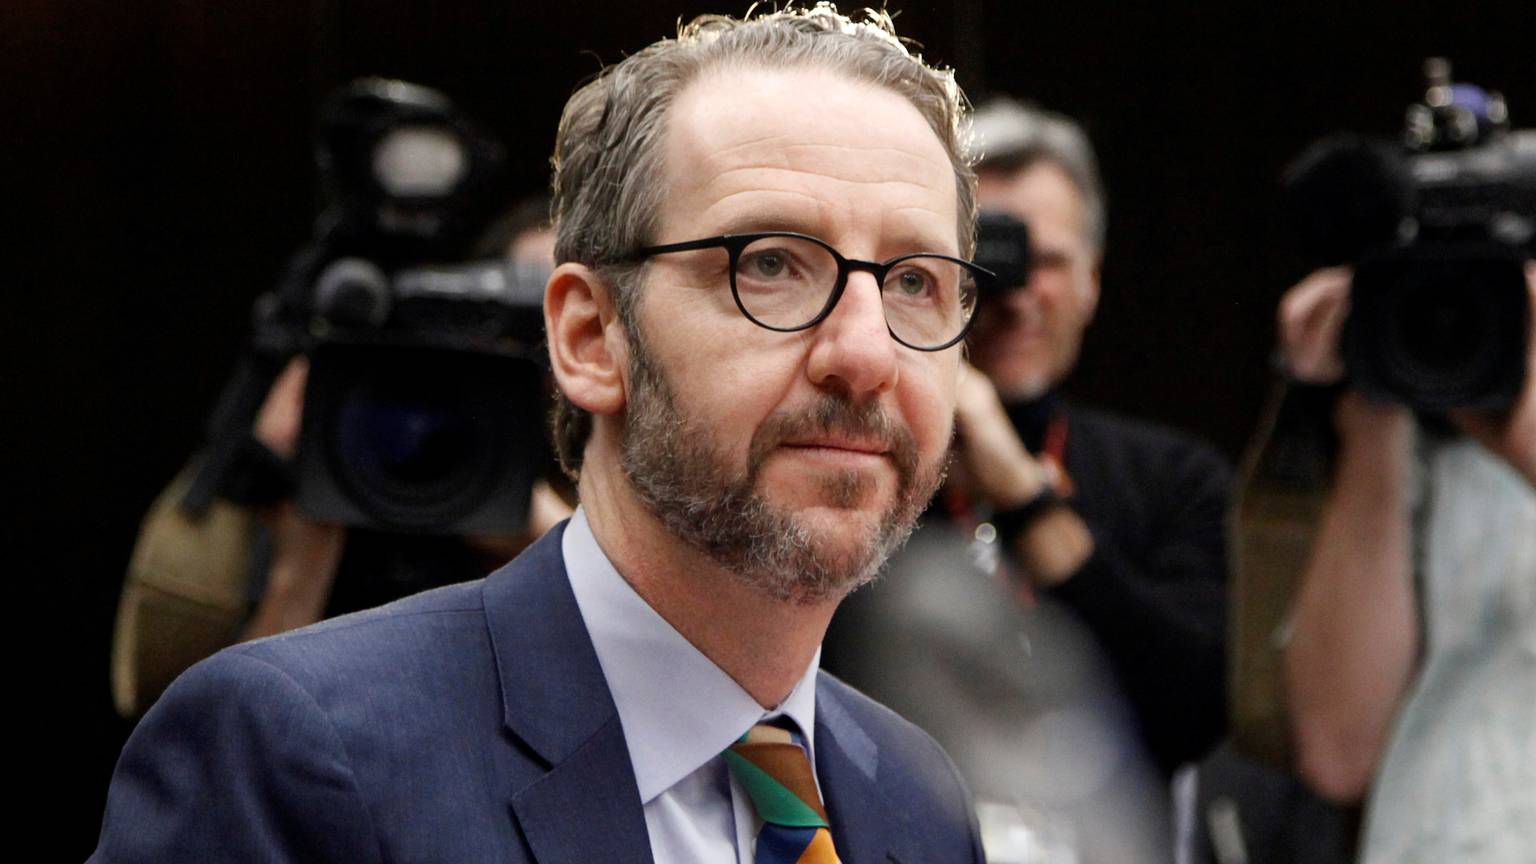 Video: Watch Gerald Butts' full opening statement to committee on SNC ...